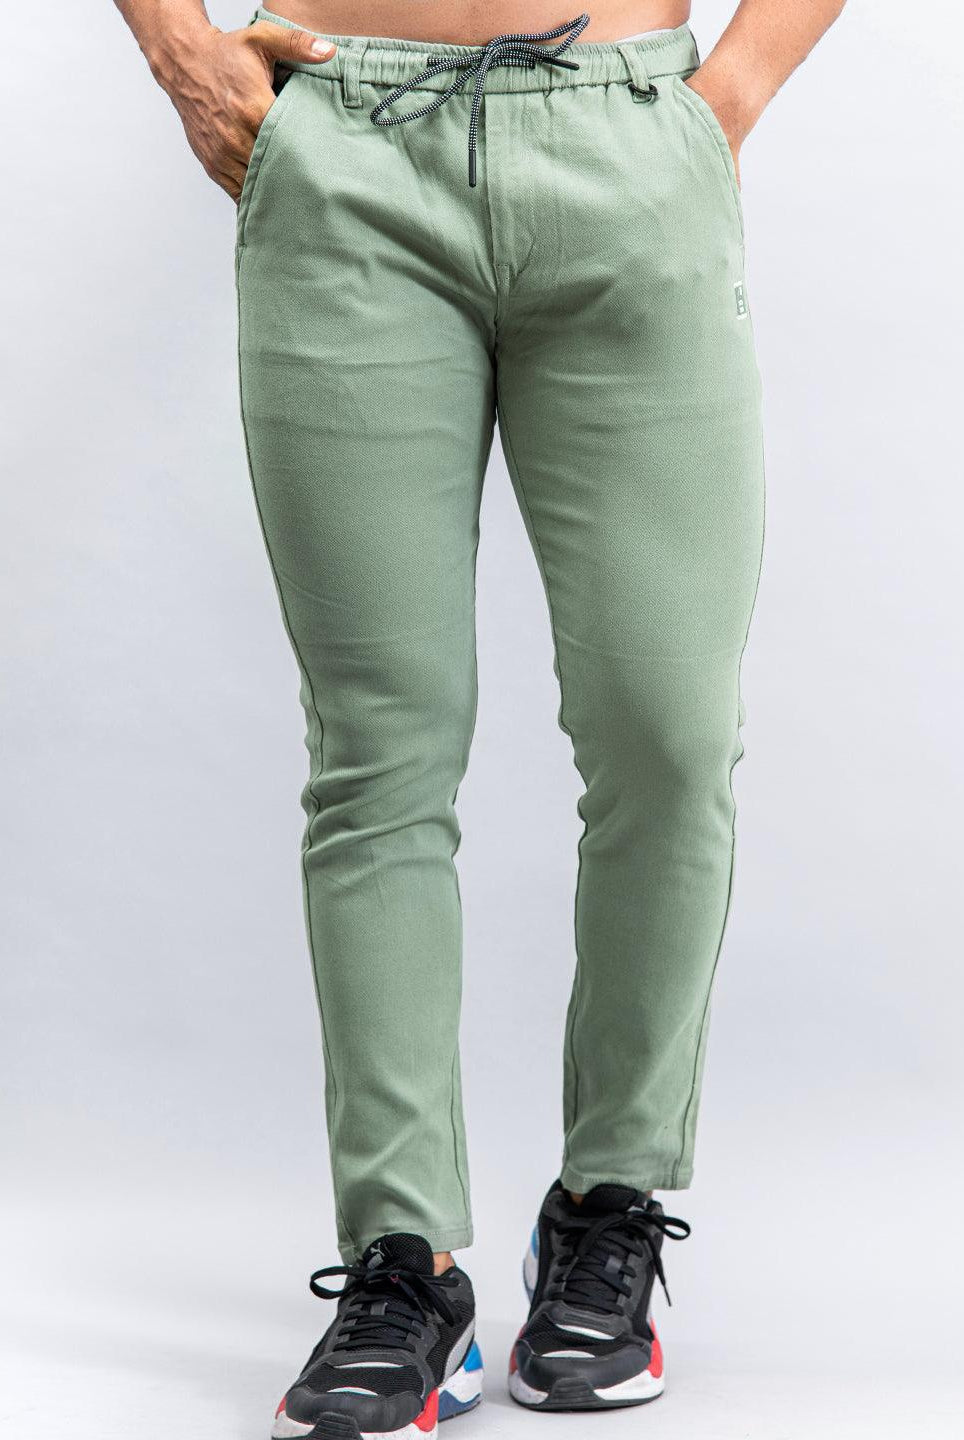 Solid Green Joggers For Men